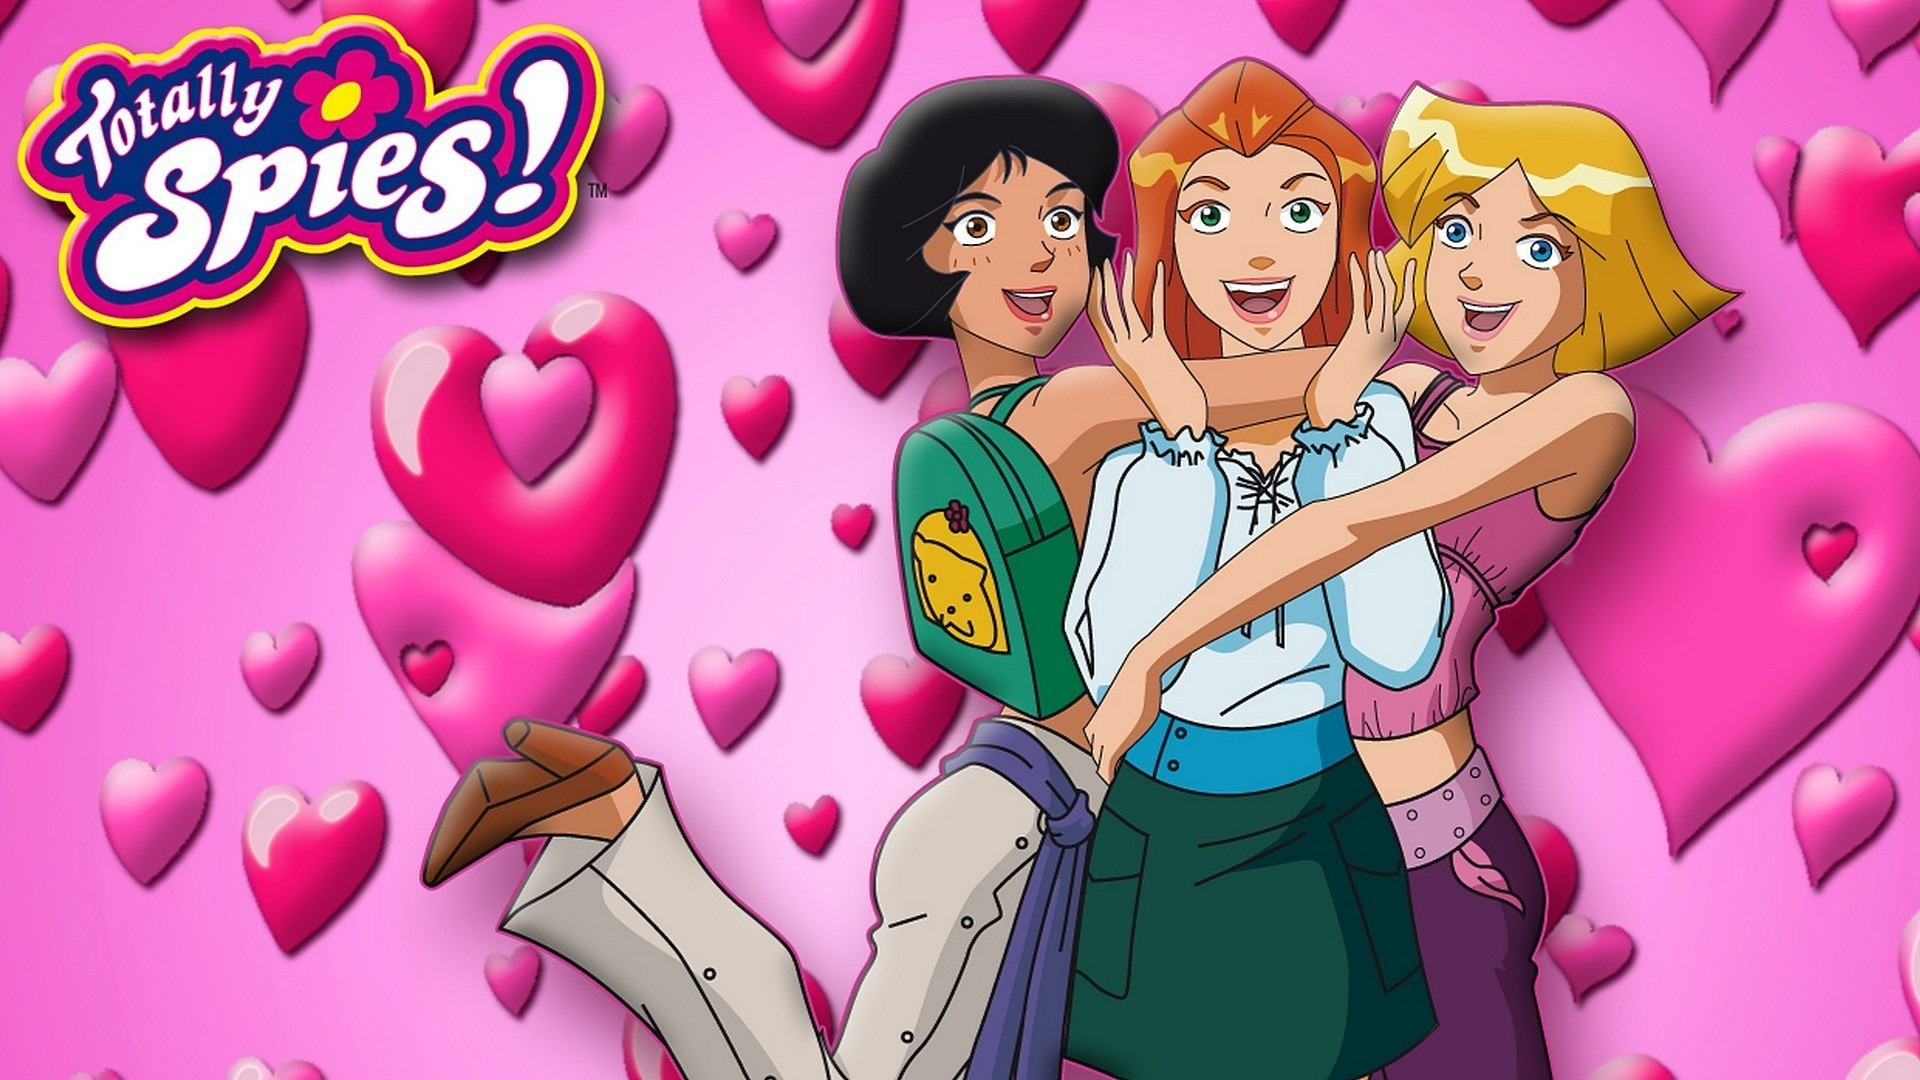 Show Totally Spies!